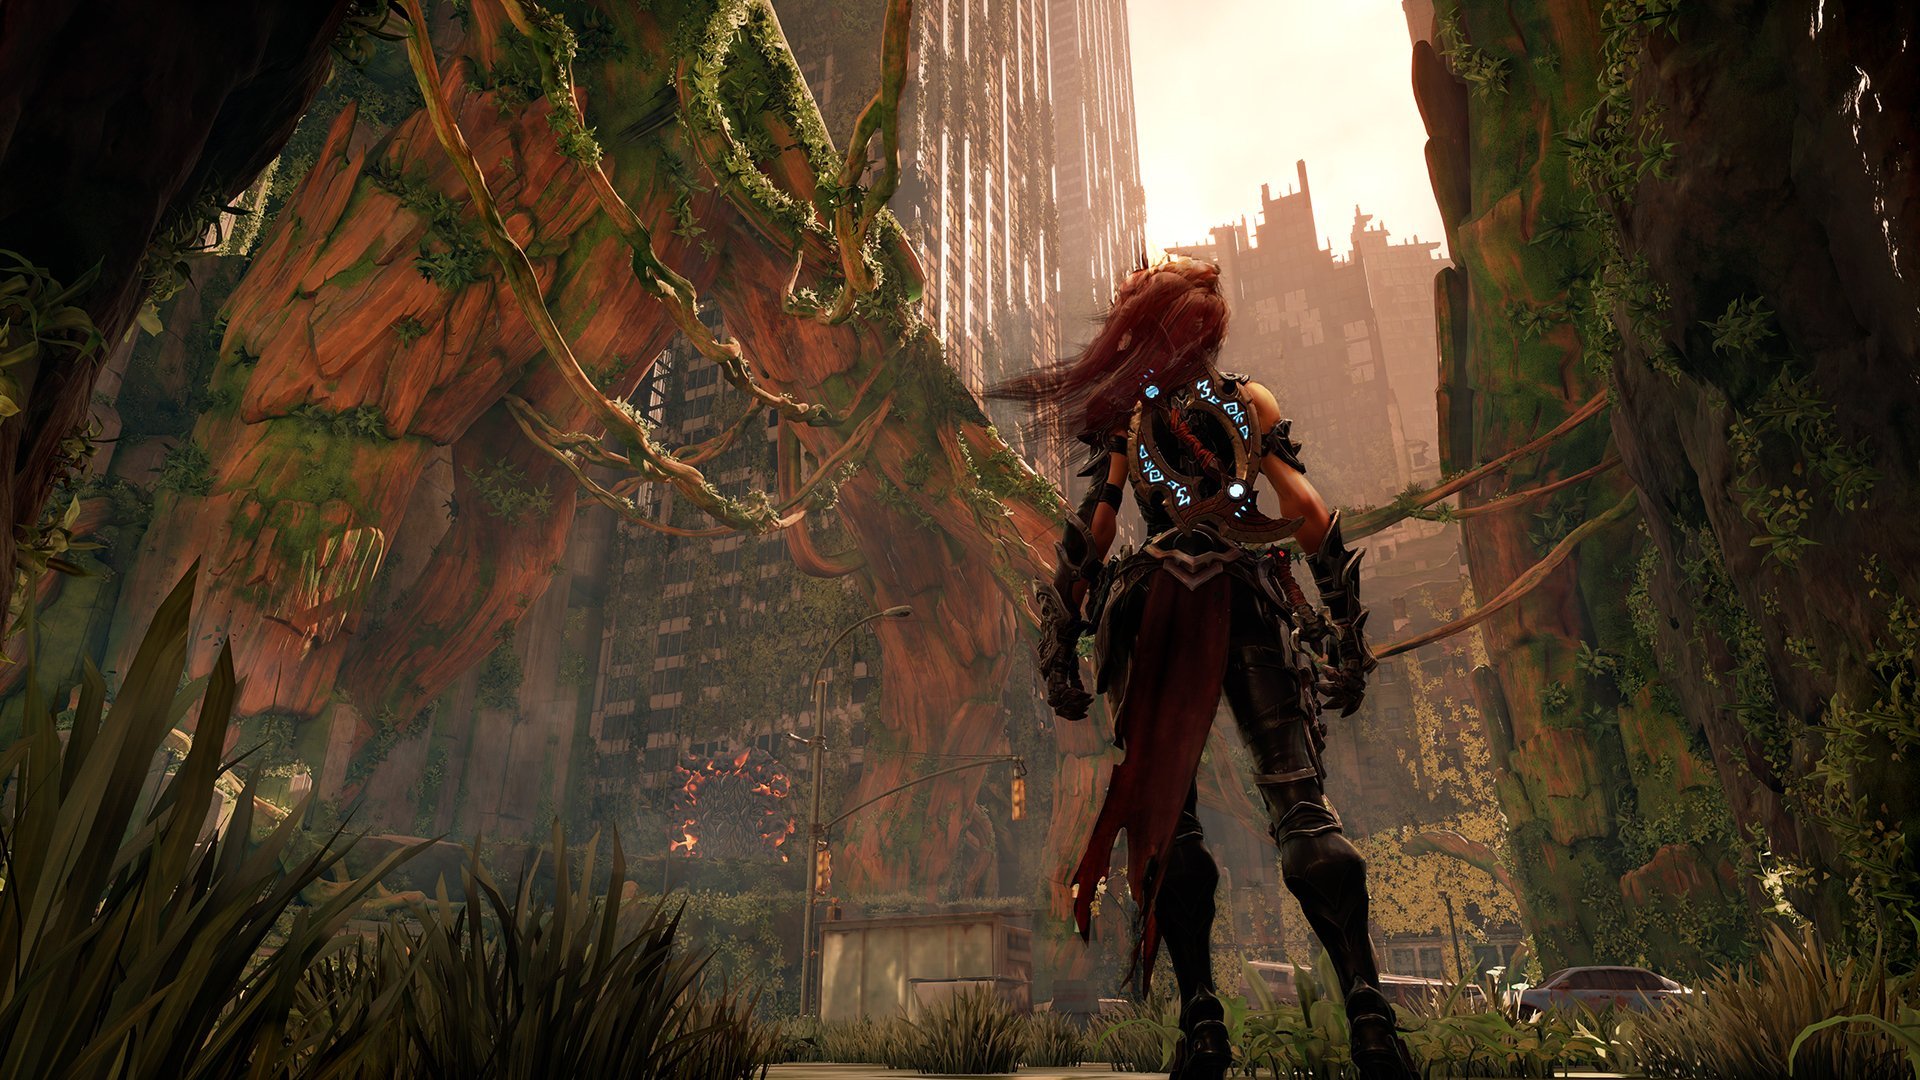 Darksiders 3 Launch Trailer released; now available in stores